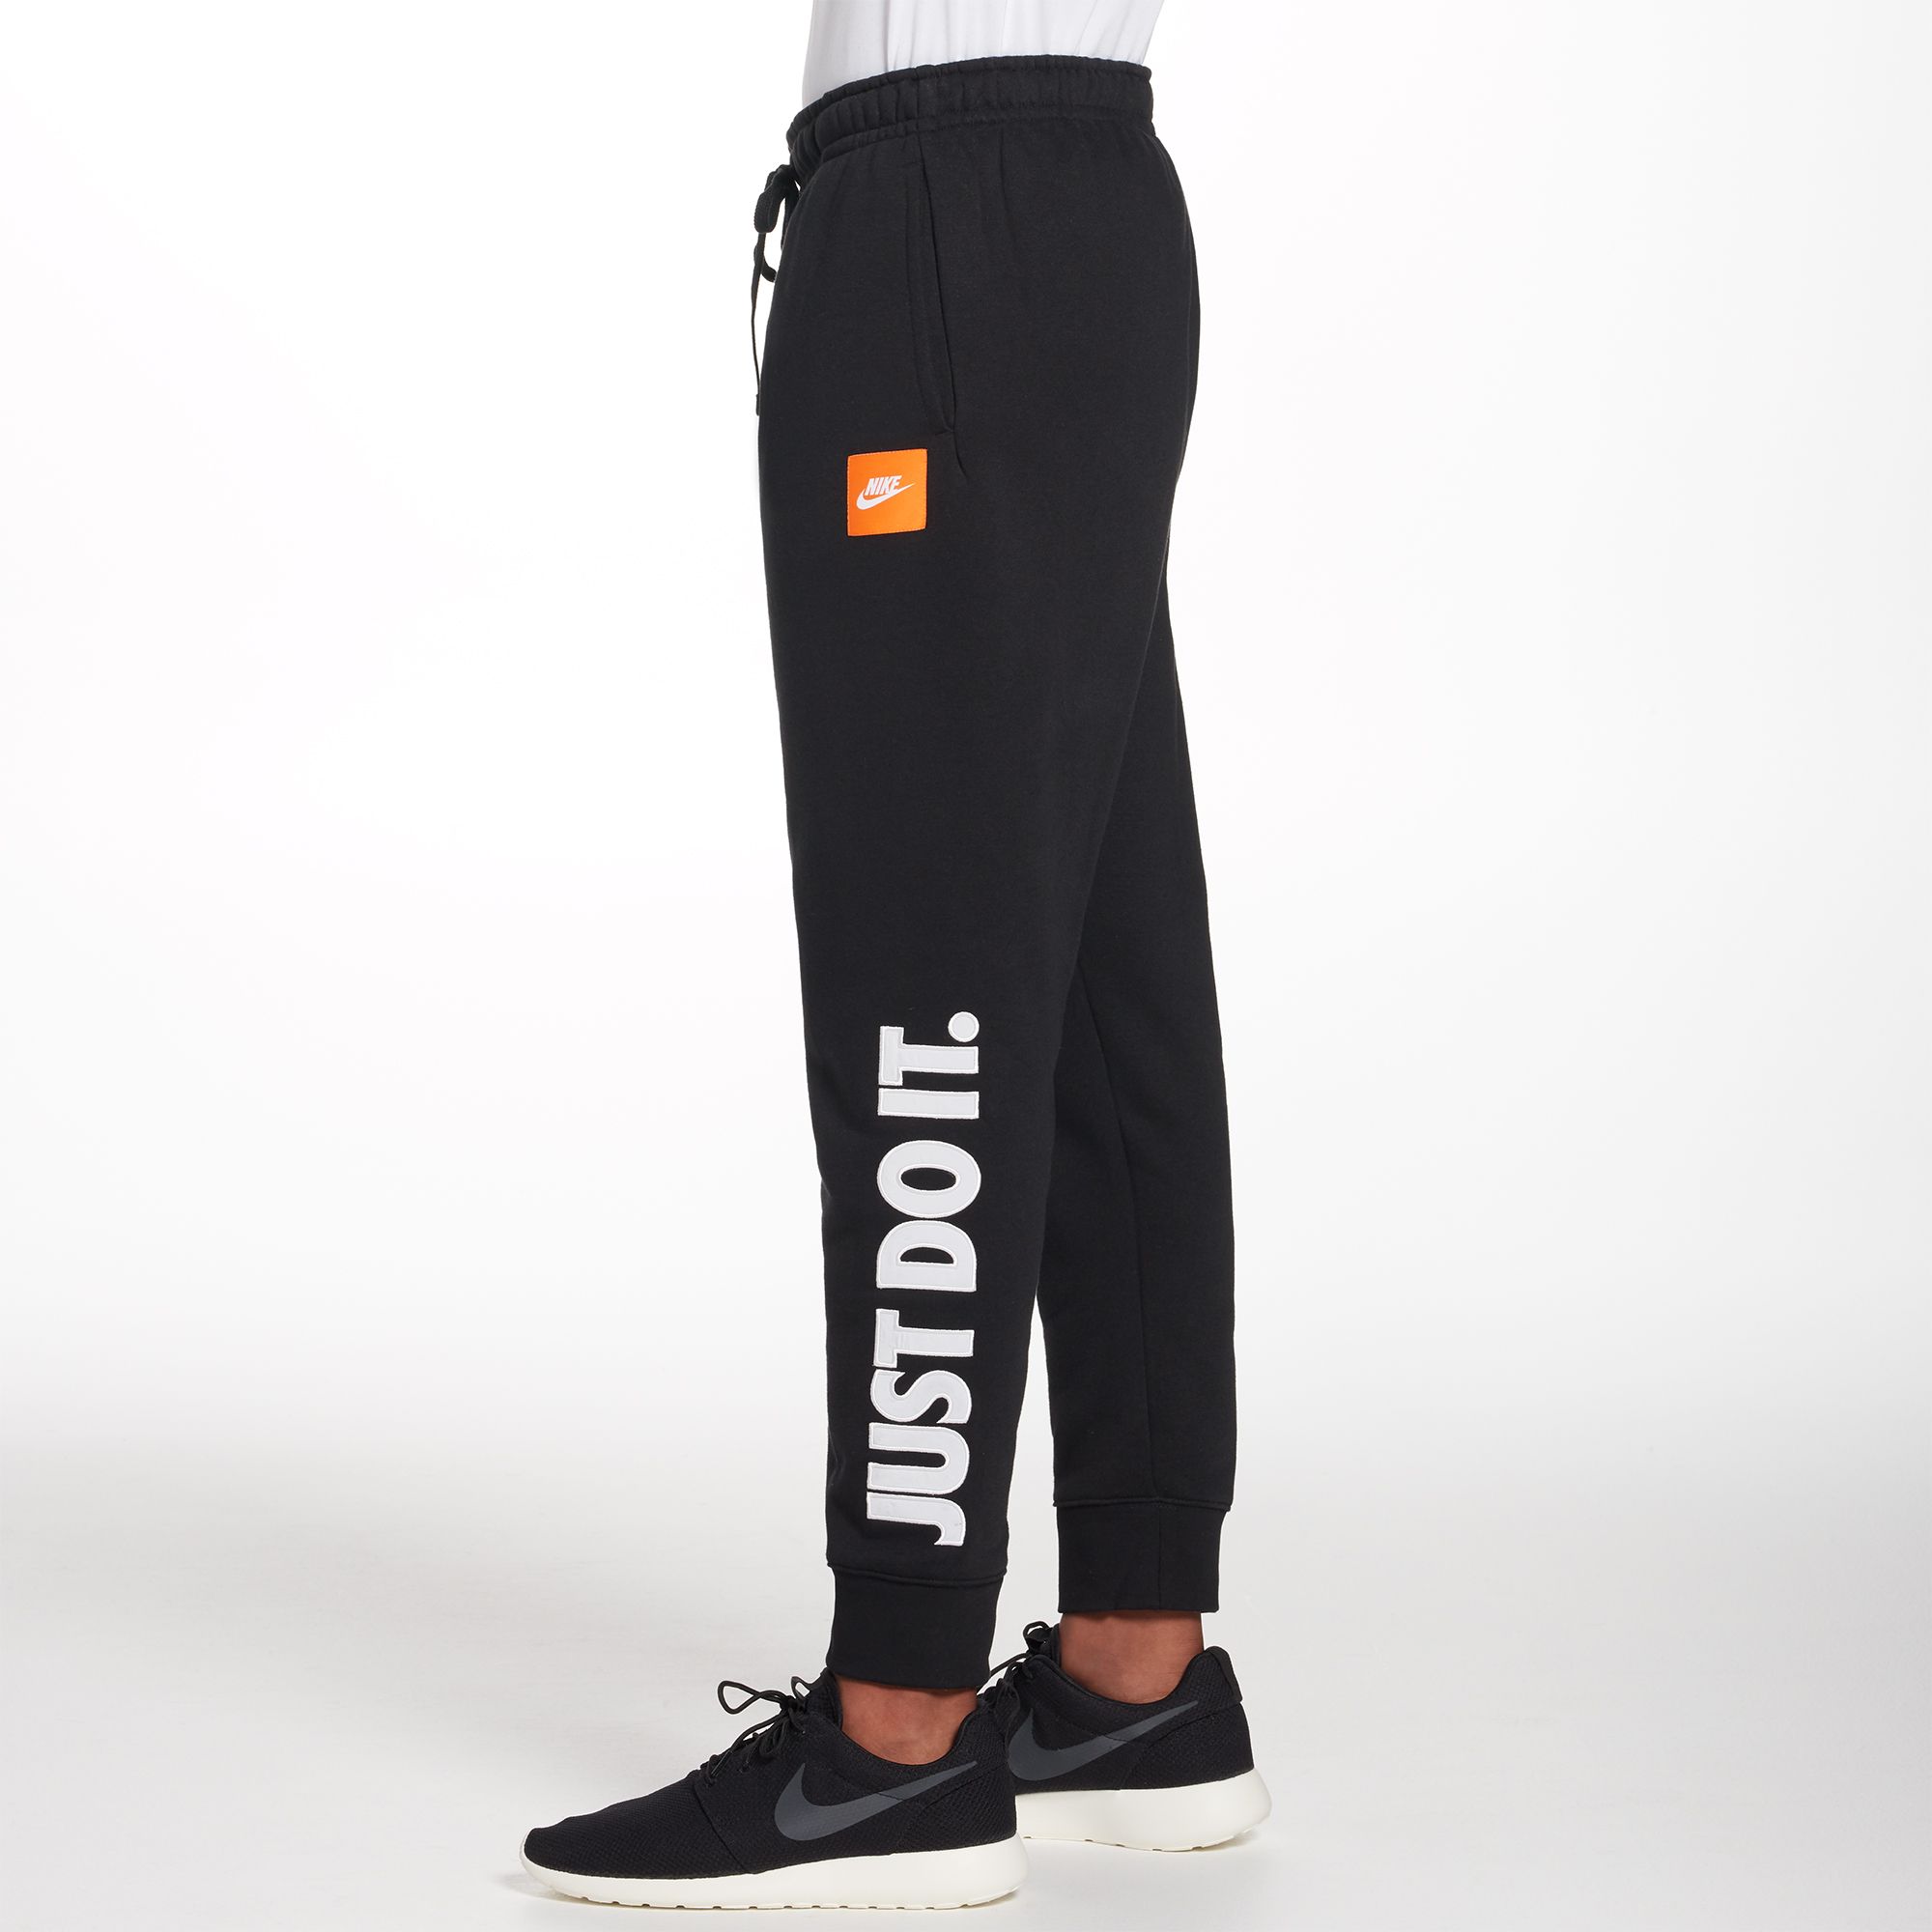 nike just do it track pants